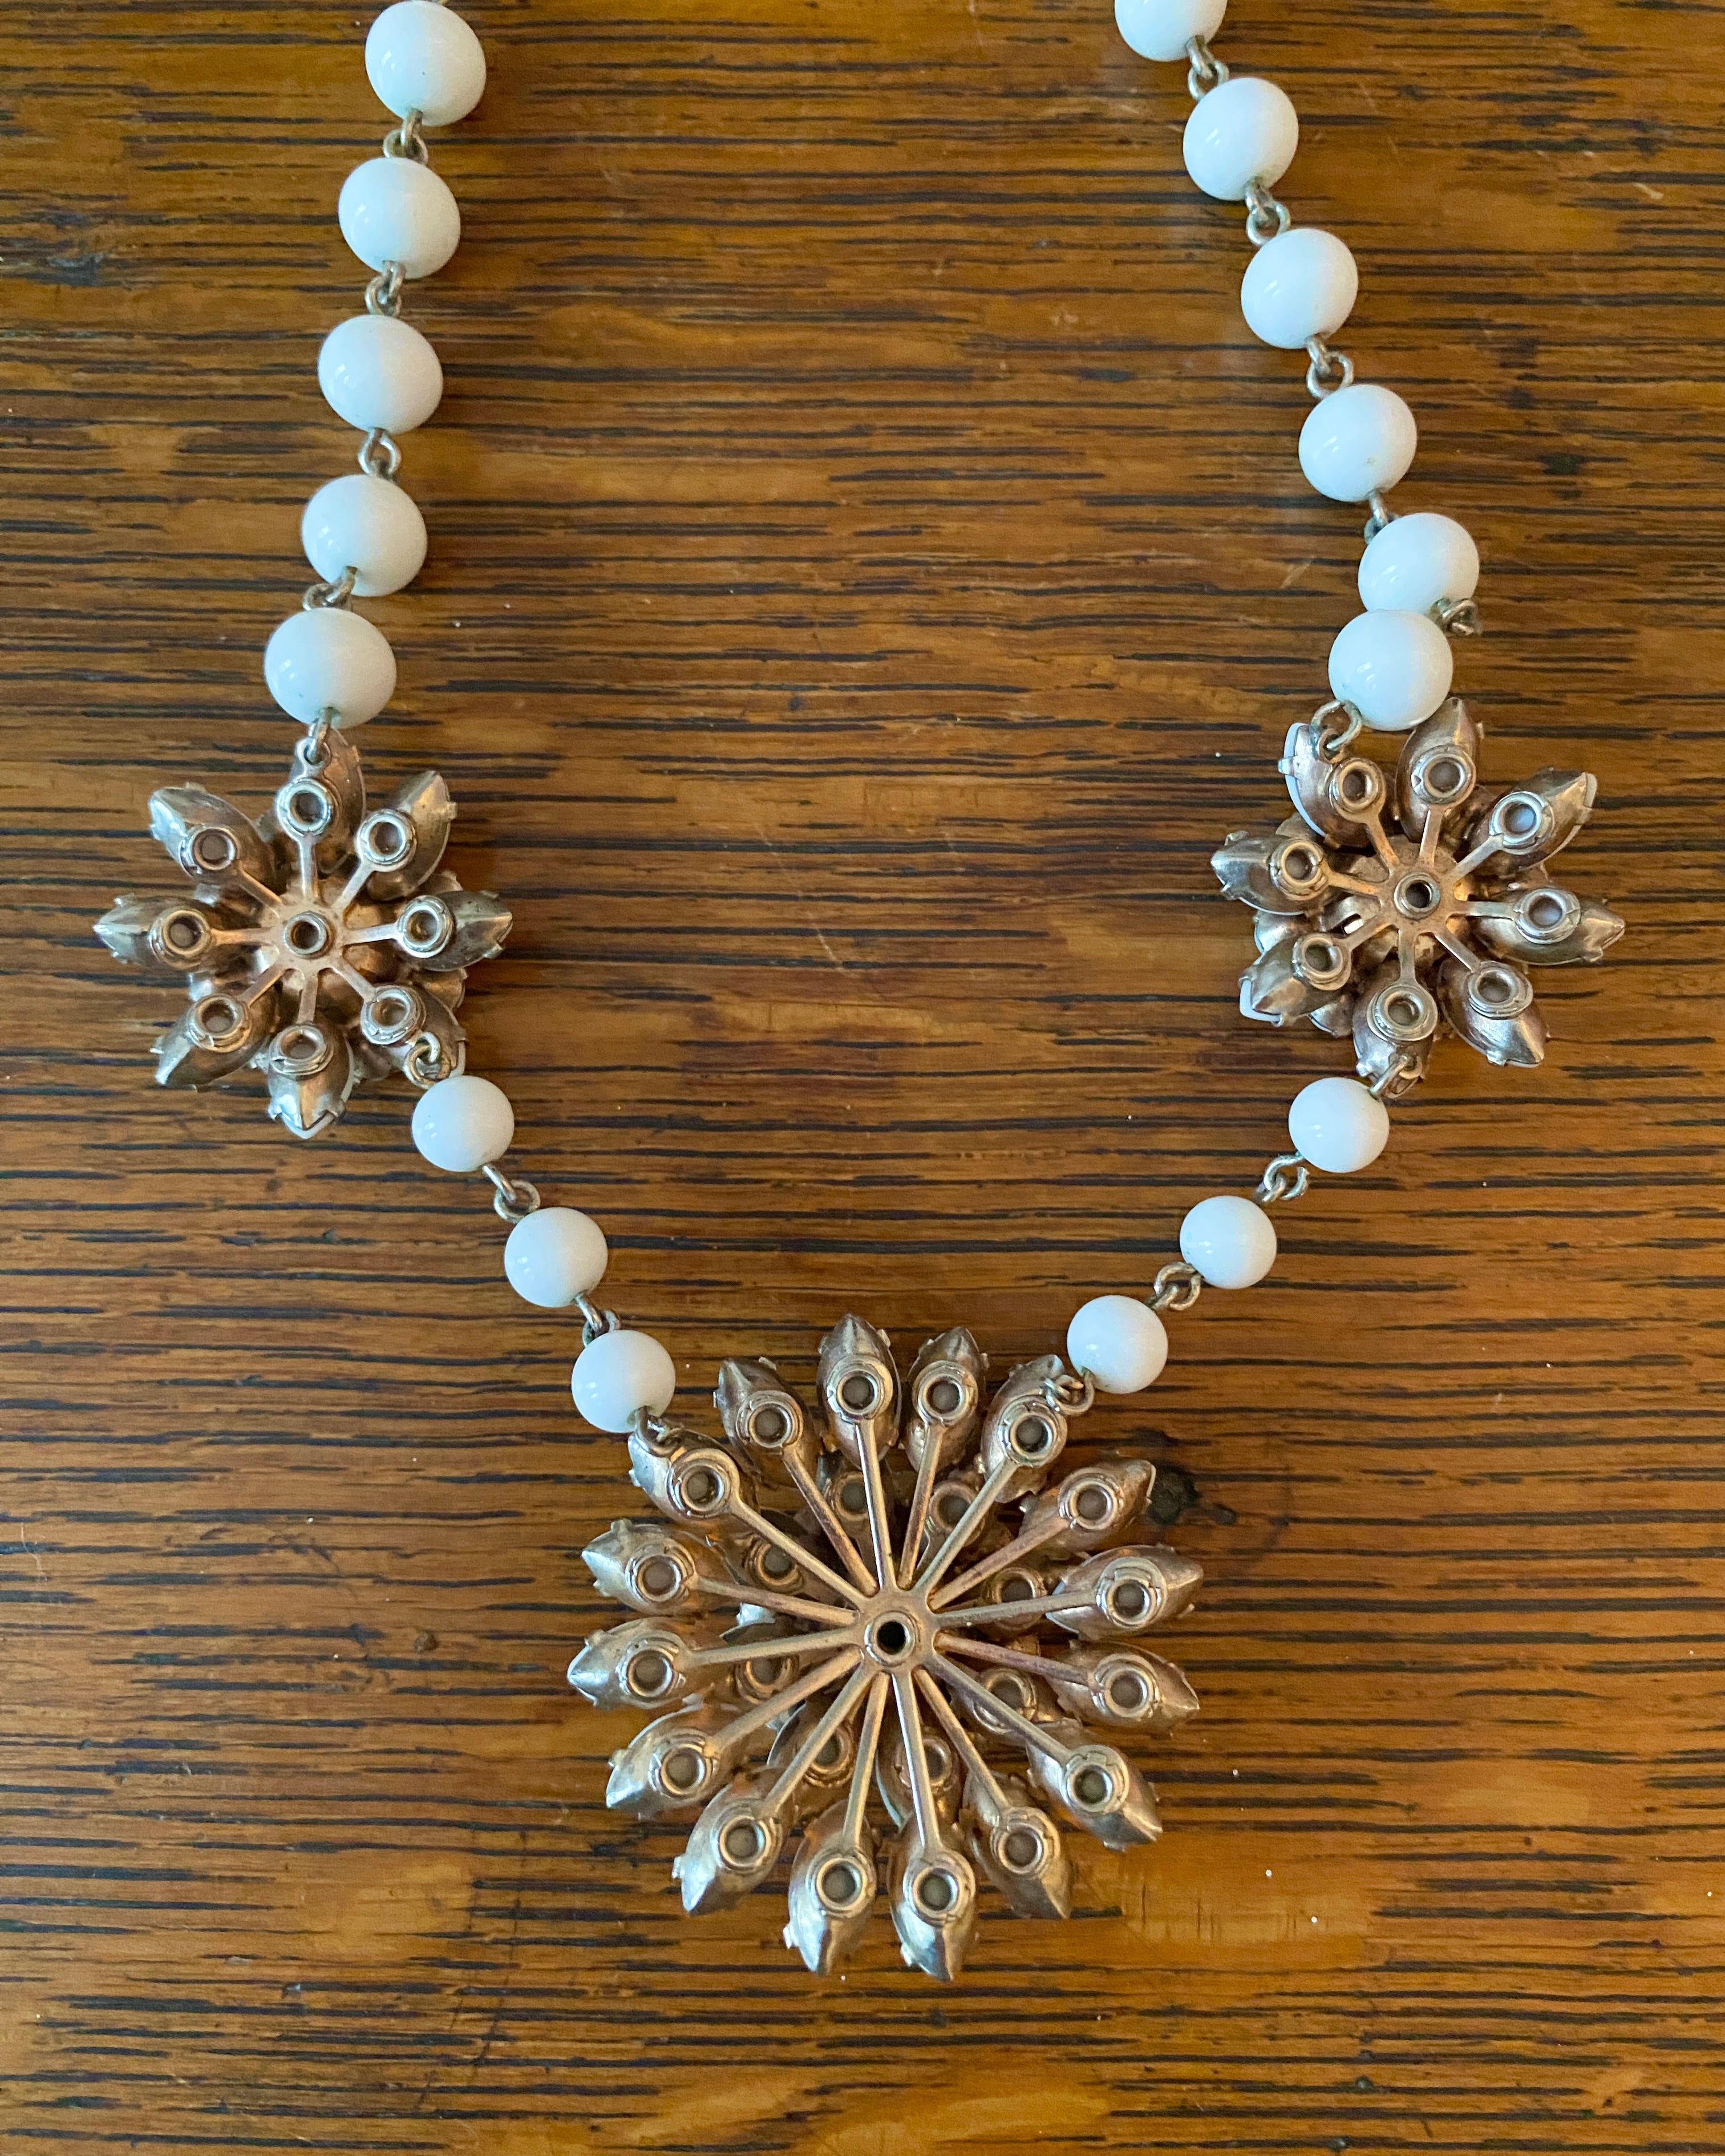 Vintage 1950s 1960s Milk Glass Flower Pendants Set in Metal Hardware with Chain Beads